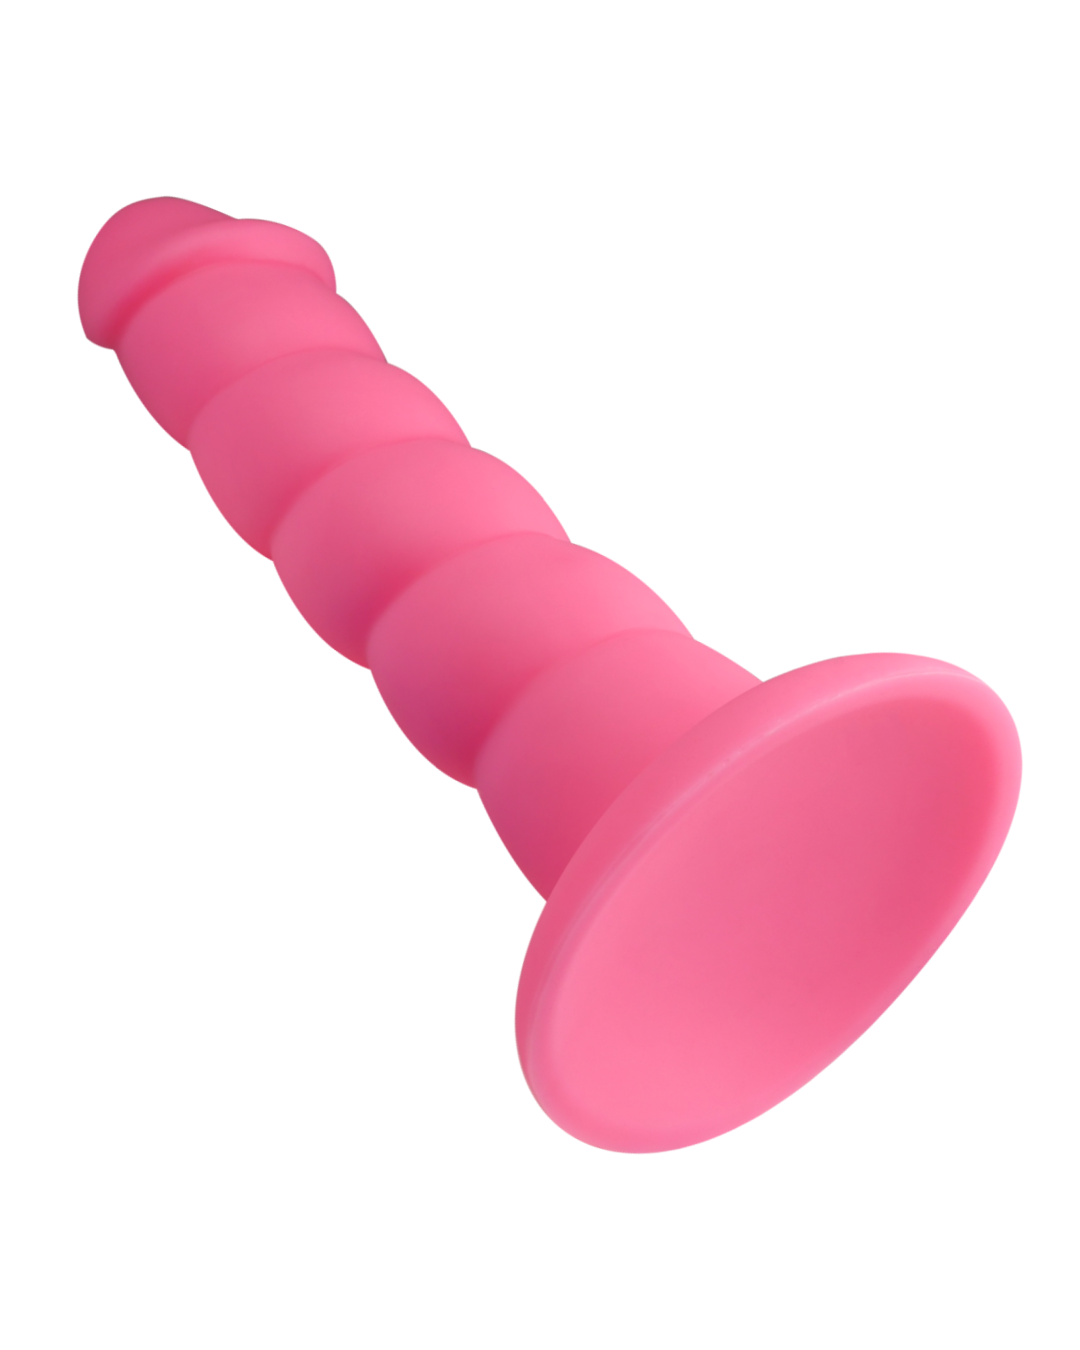 Suga Daddy 9.5 Inch Swirled Pink Silicone Dildo close up of suction cup